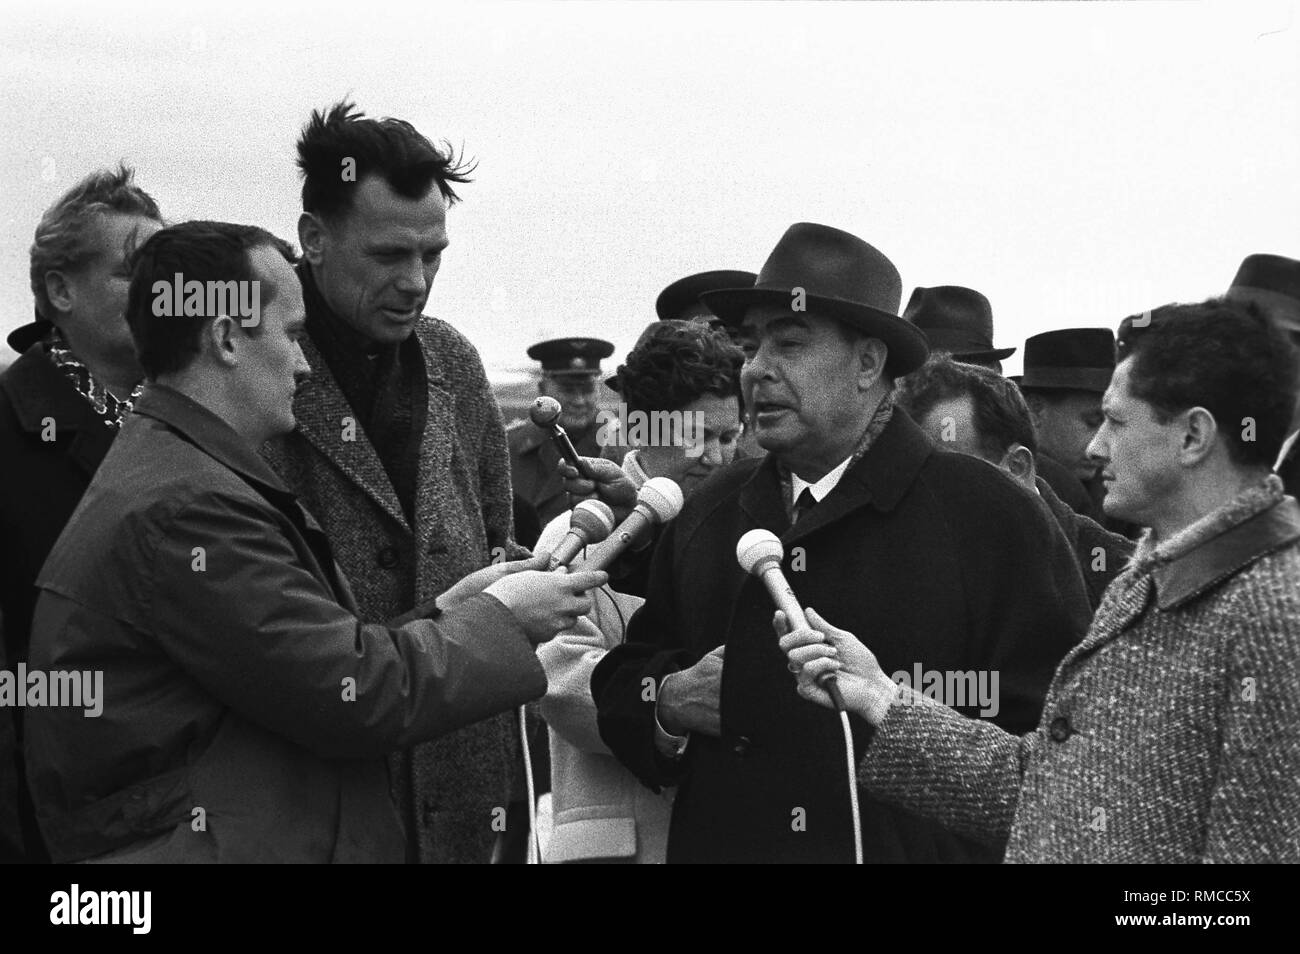 The General Secretary of the CPSU, Leonid Brezhnev, is being interviewed by journalists at the Erfurt Airport. Stock Photo